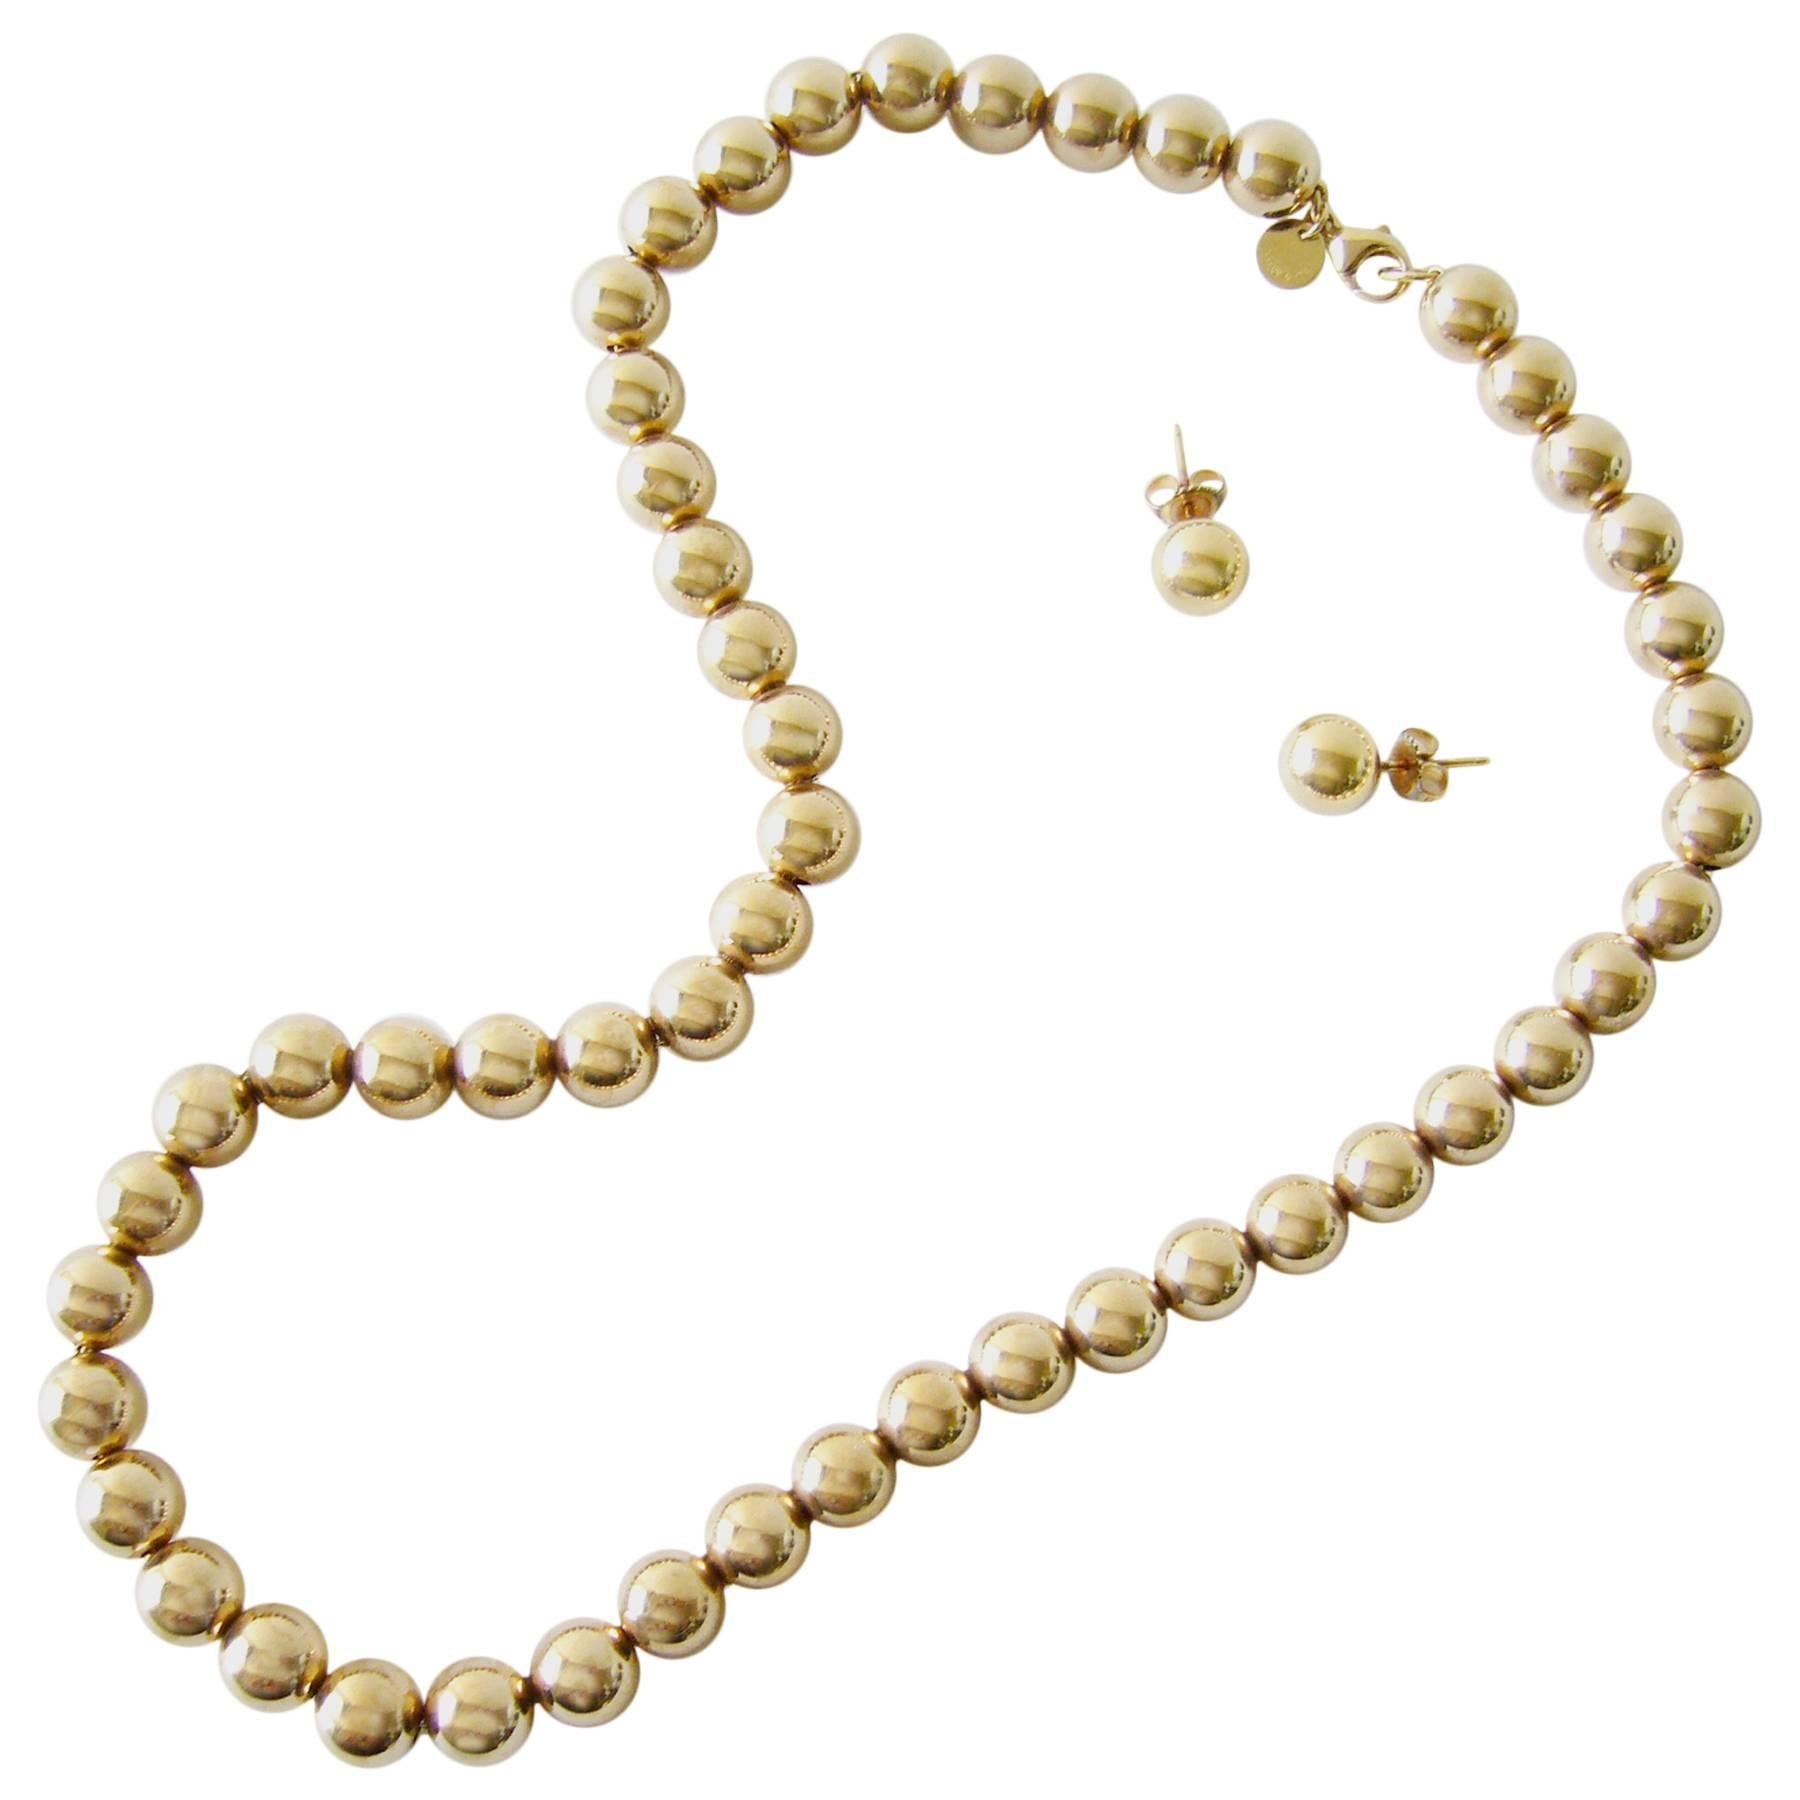 Tiffany & Co. Gold Beaded Necklace and Earrings Suite